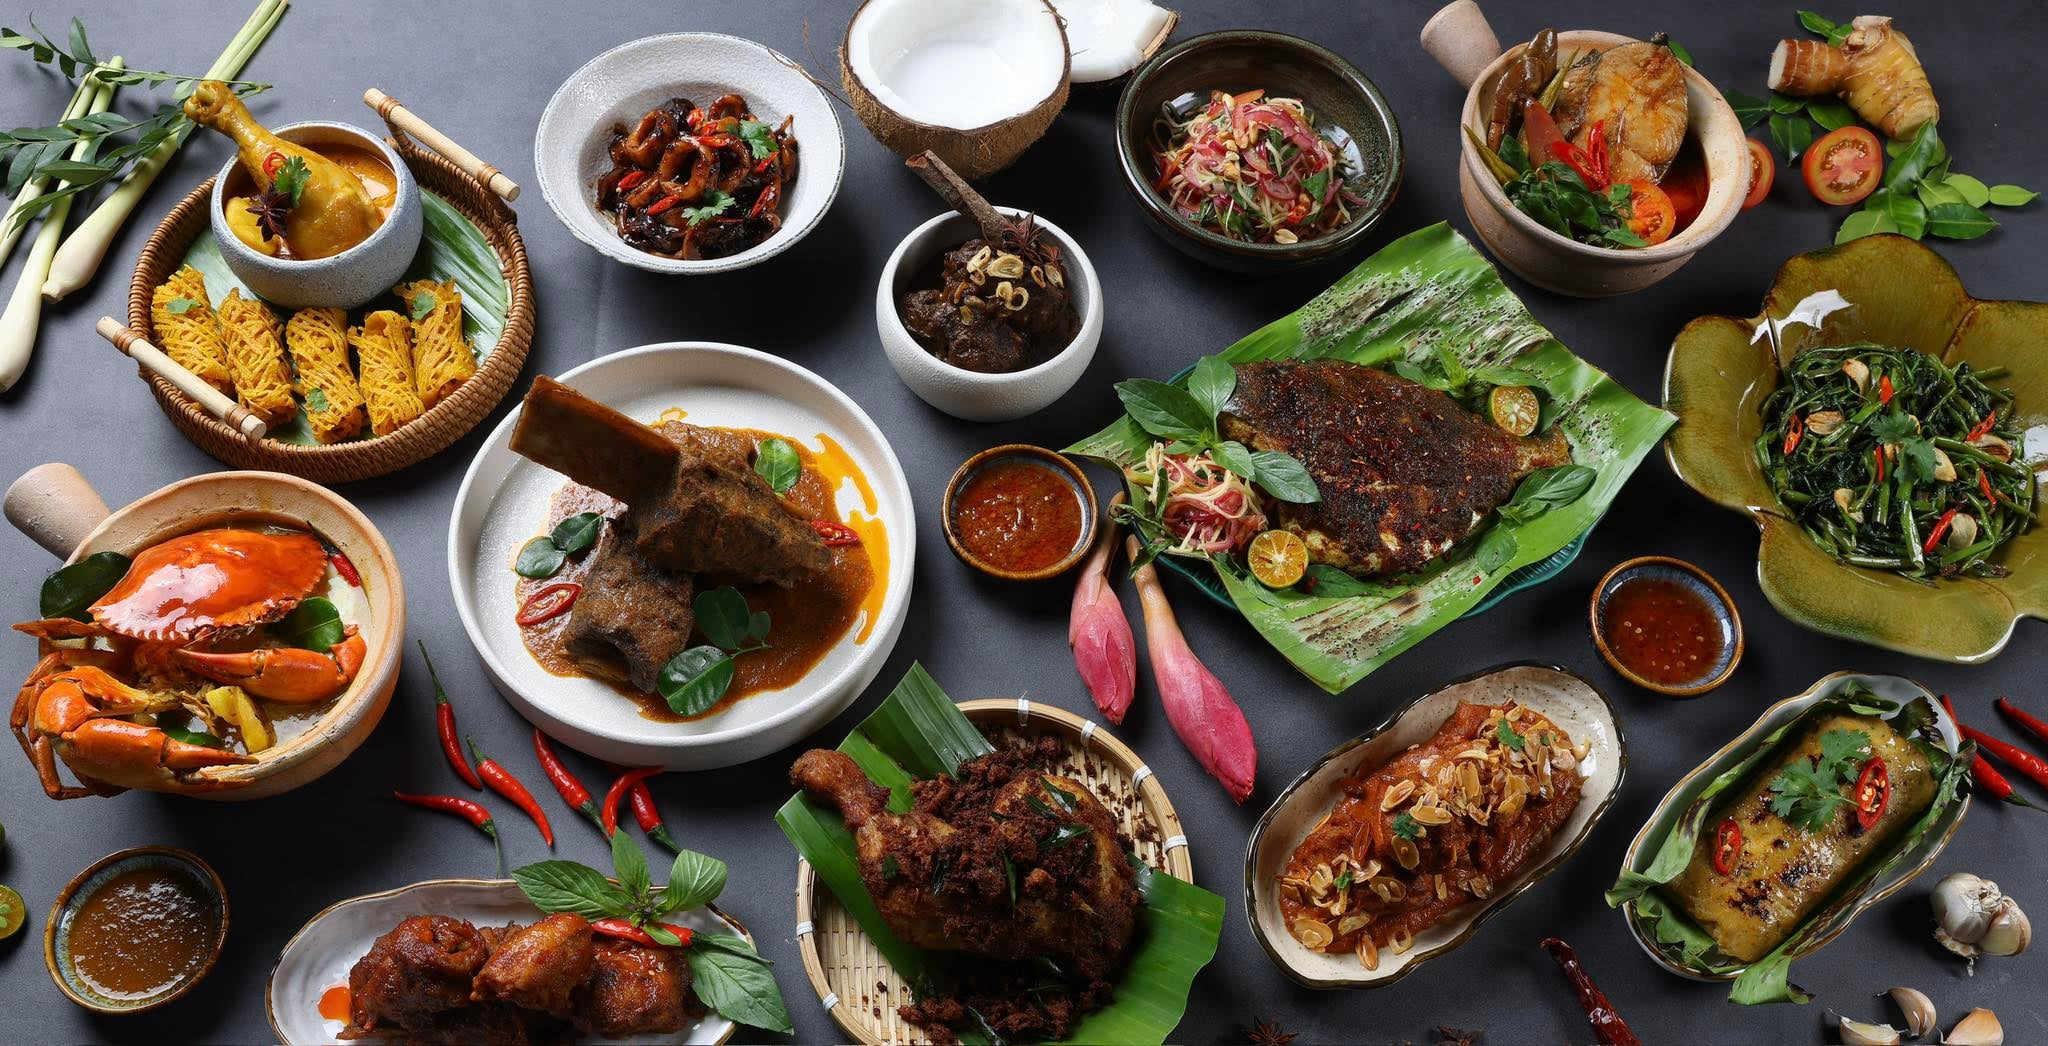 Malaysian cuisine celebrated in Ho Chi Minh City